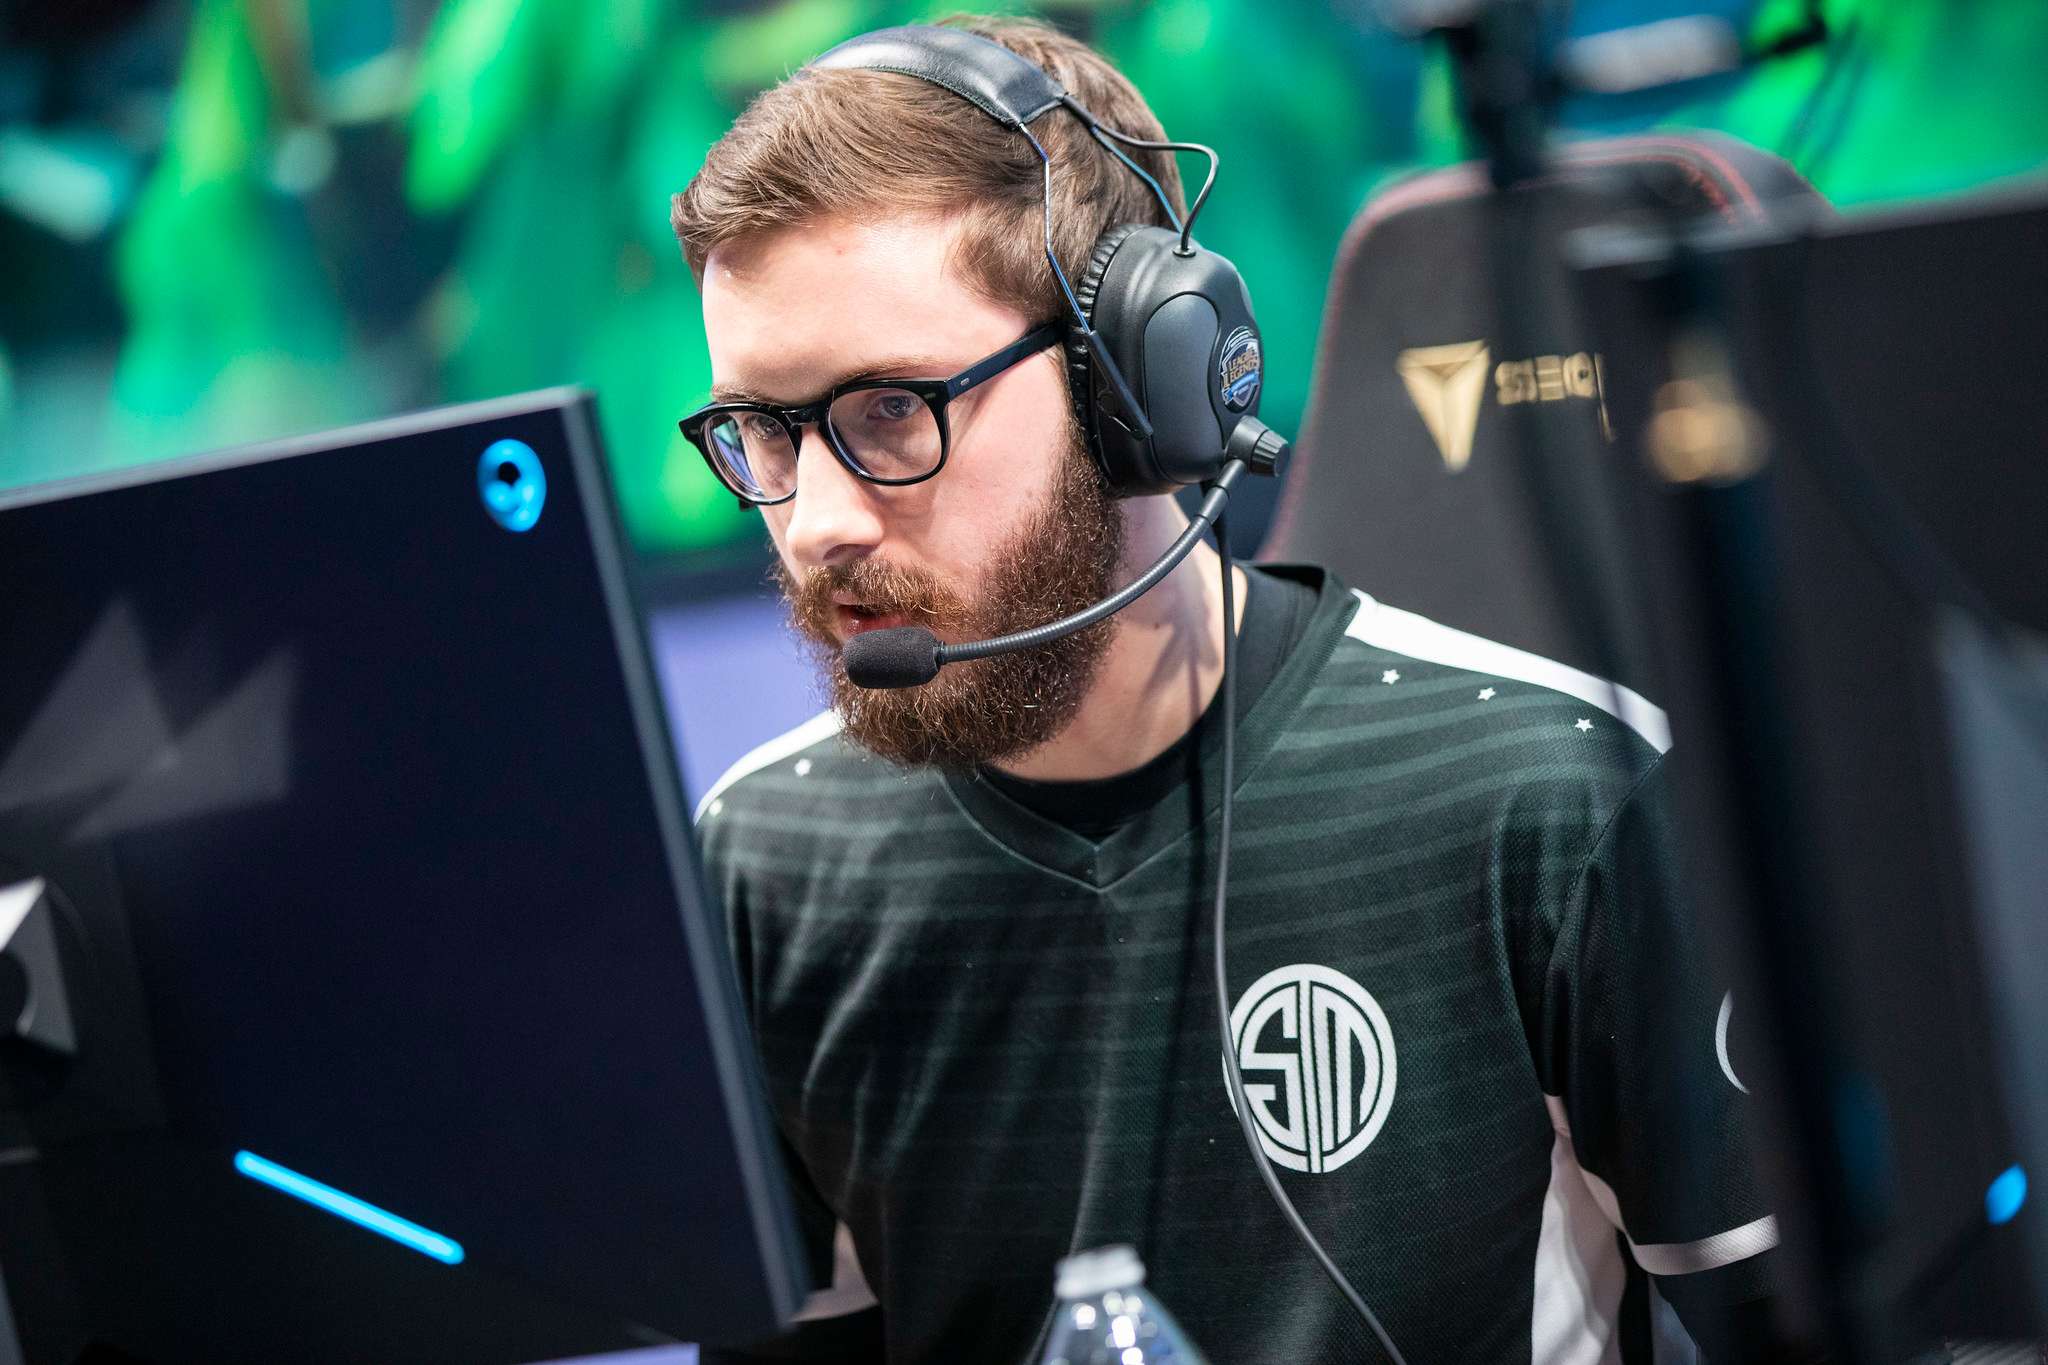 Bjergsen playing for TSM during LCS Spring 2019